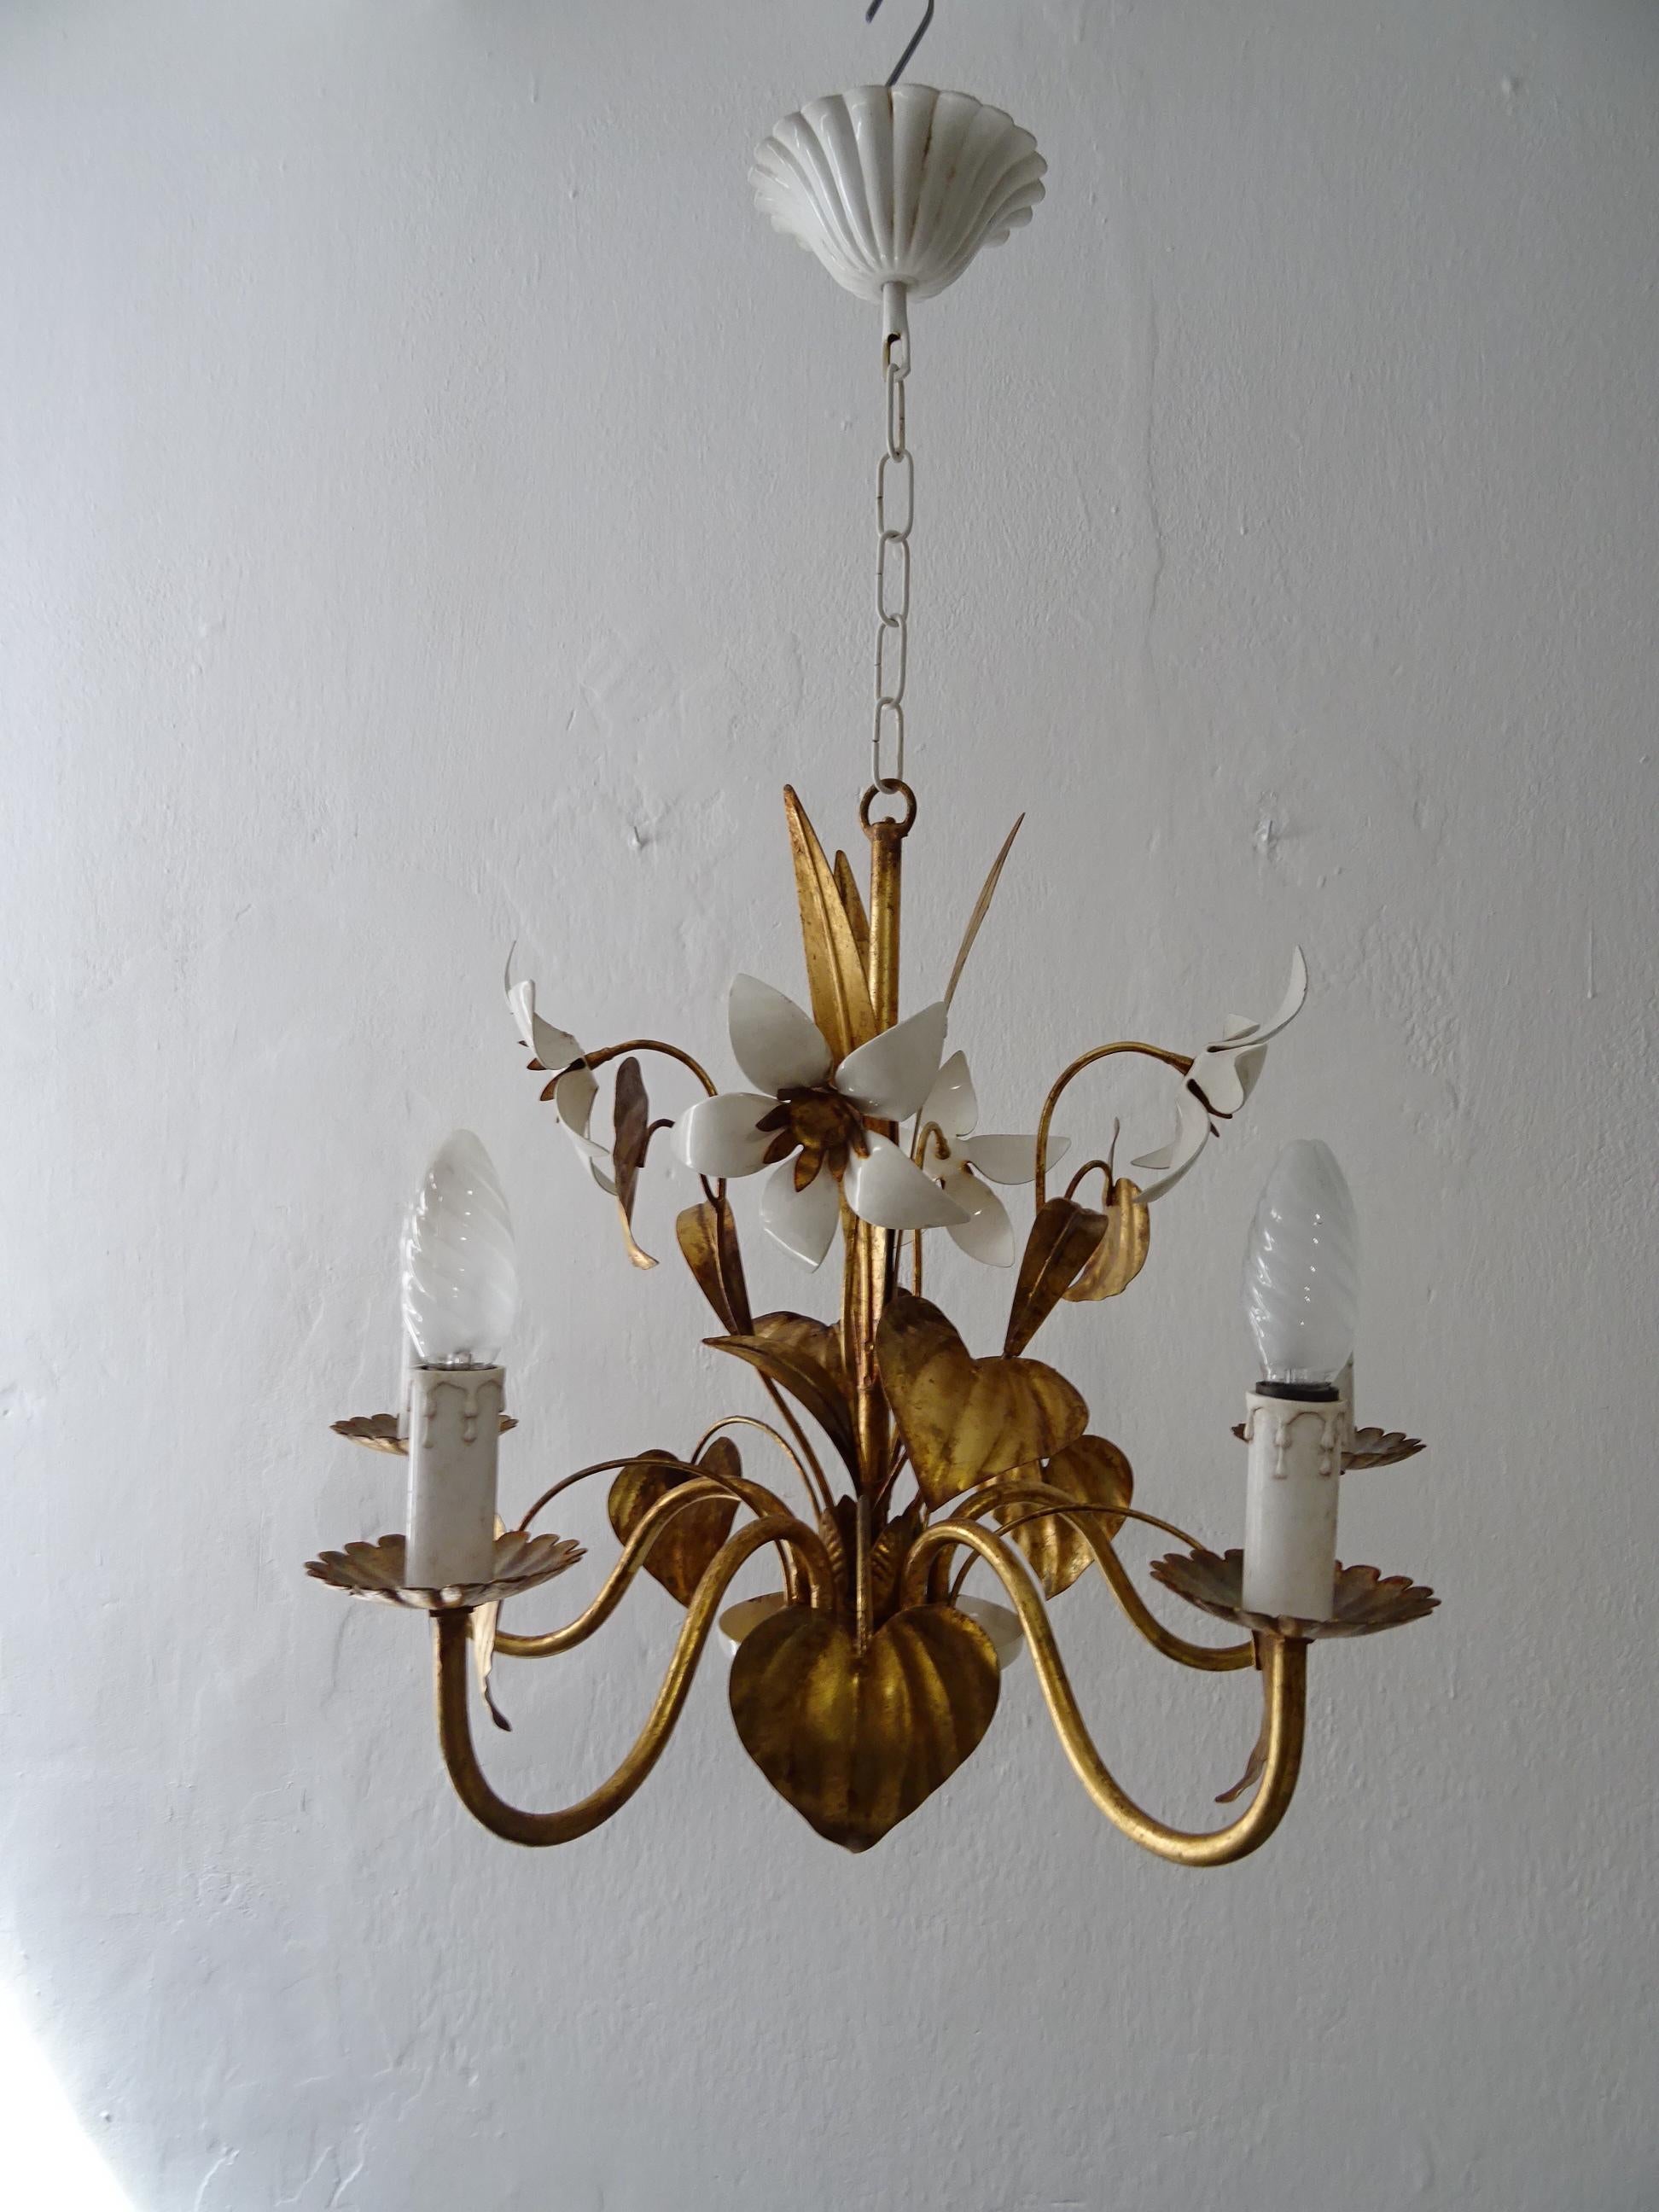 Housing 5 lights. Will be rewired with certified US UL sockets for the USA and appropriate sockets for all other countries. Flower Hollywood regency chandelier. Original white and gold paint. Great patina on the gold. Free priority UPS shipping from